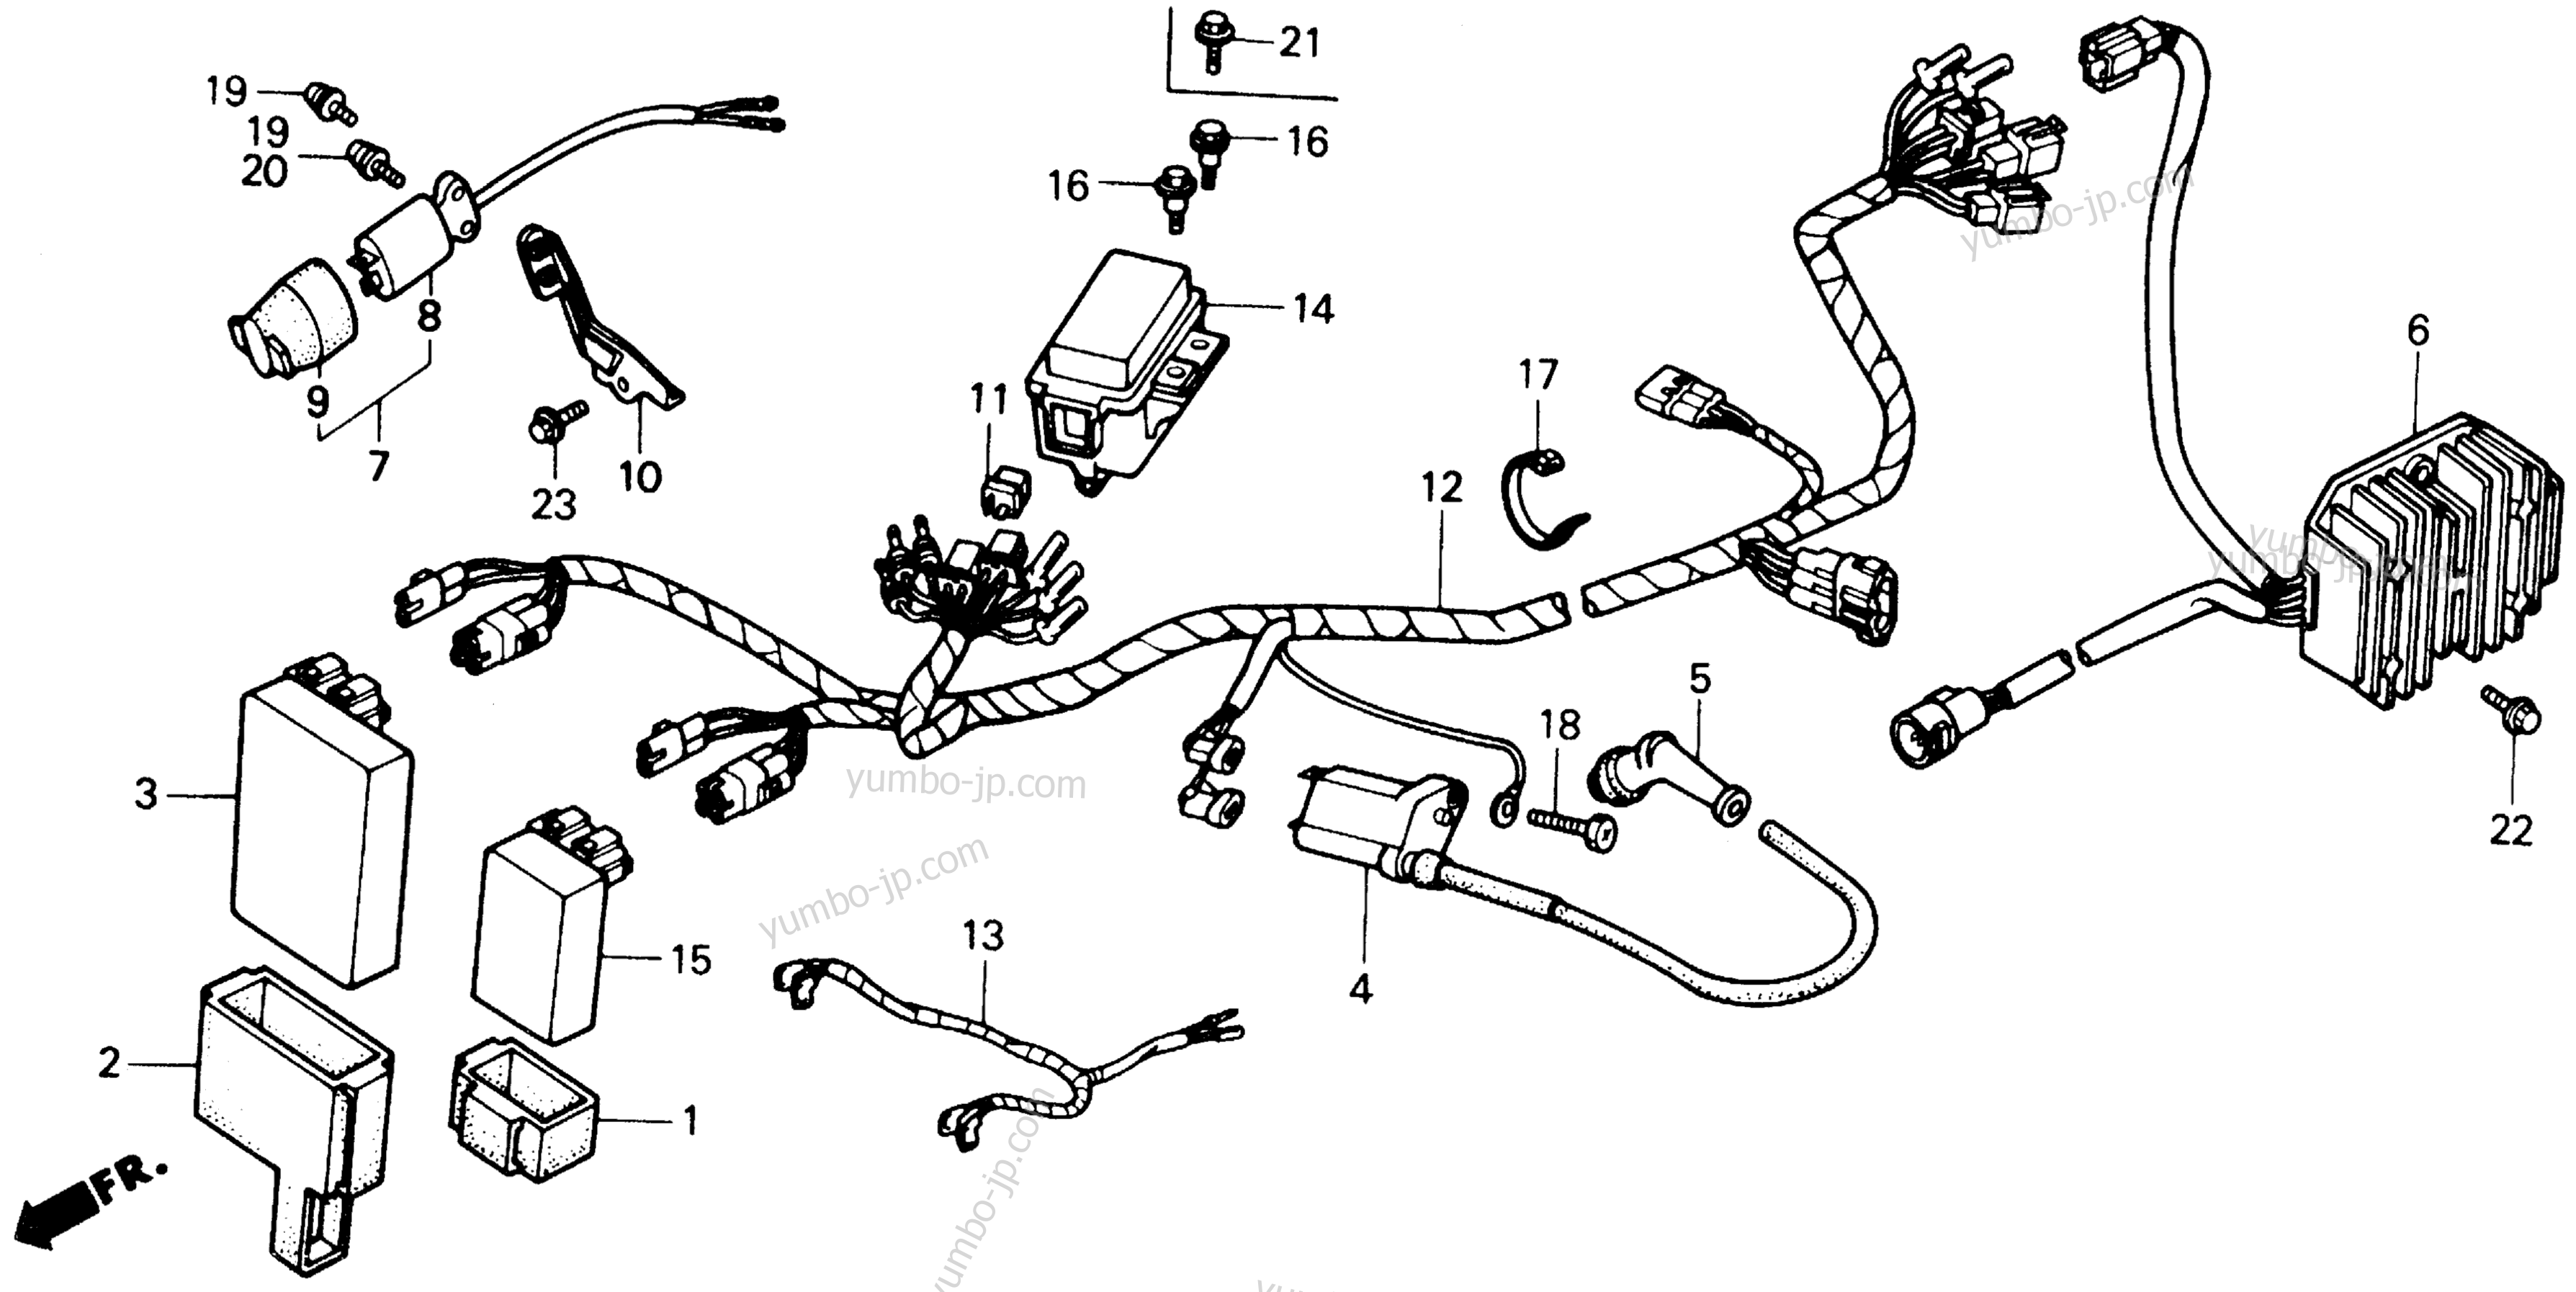 WIRE HARNESS for ATVs HONDA TRX300FW A 1990 year